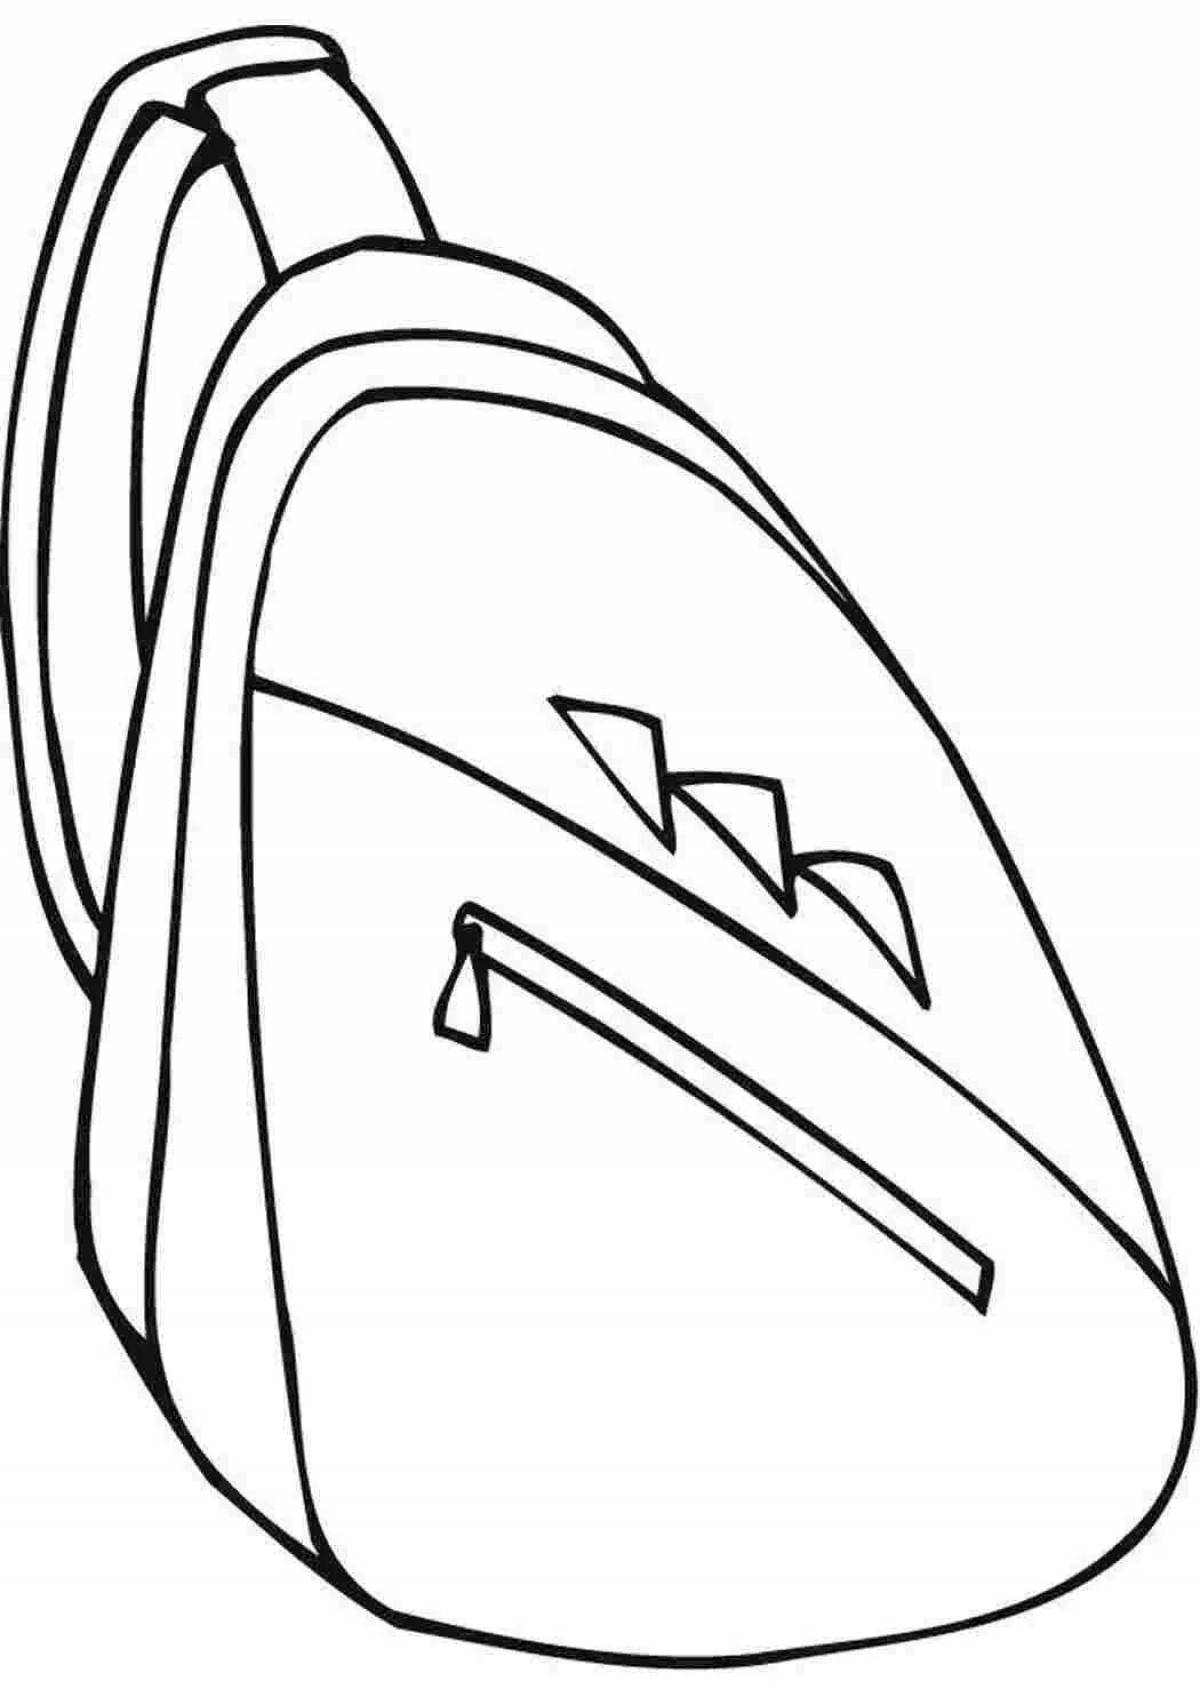 Sweet backpack coloring page